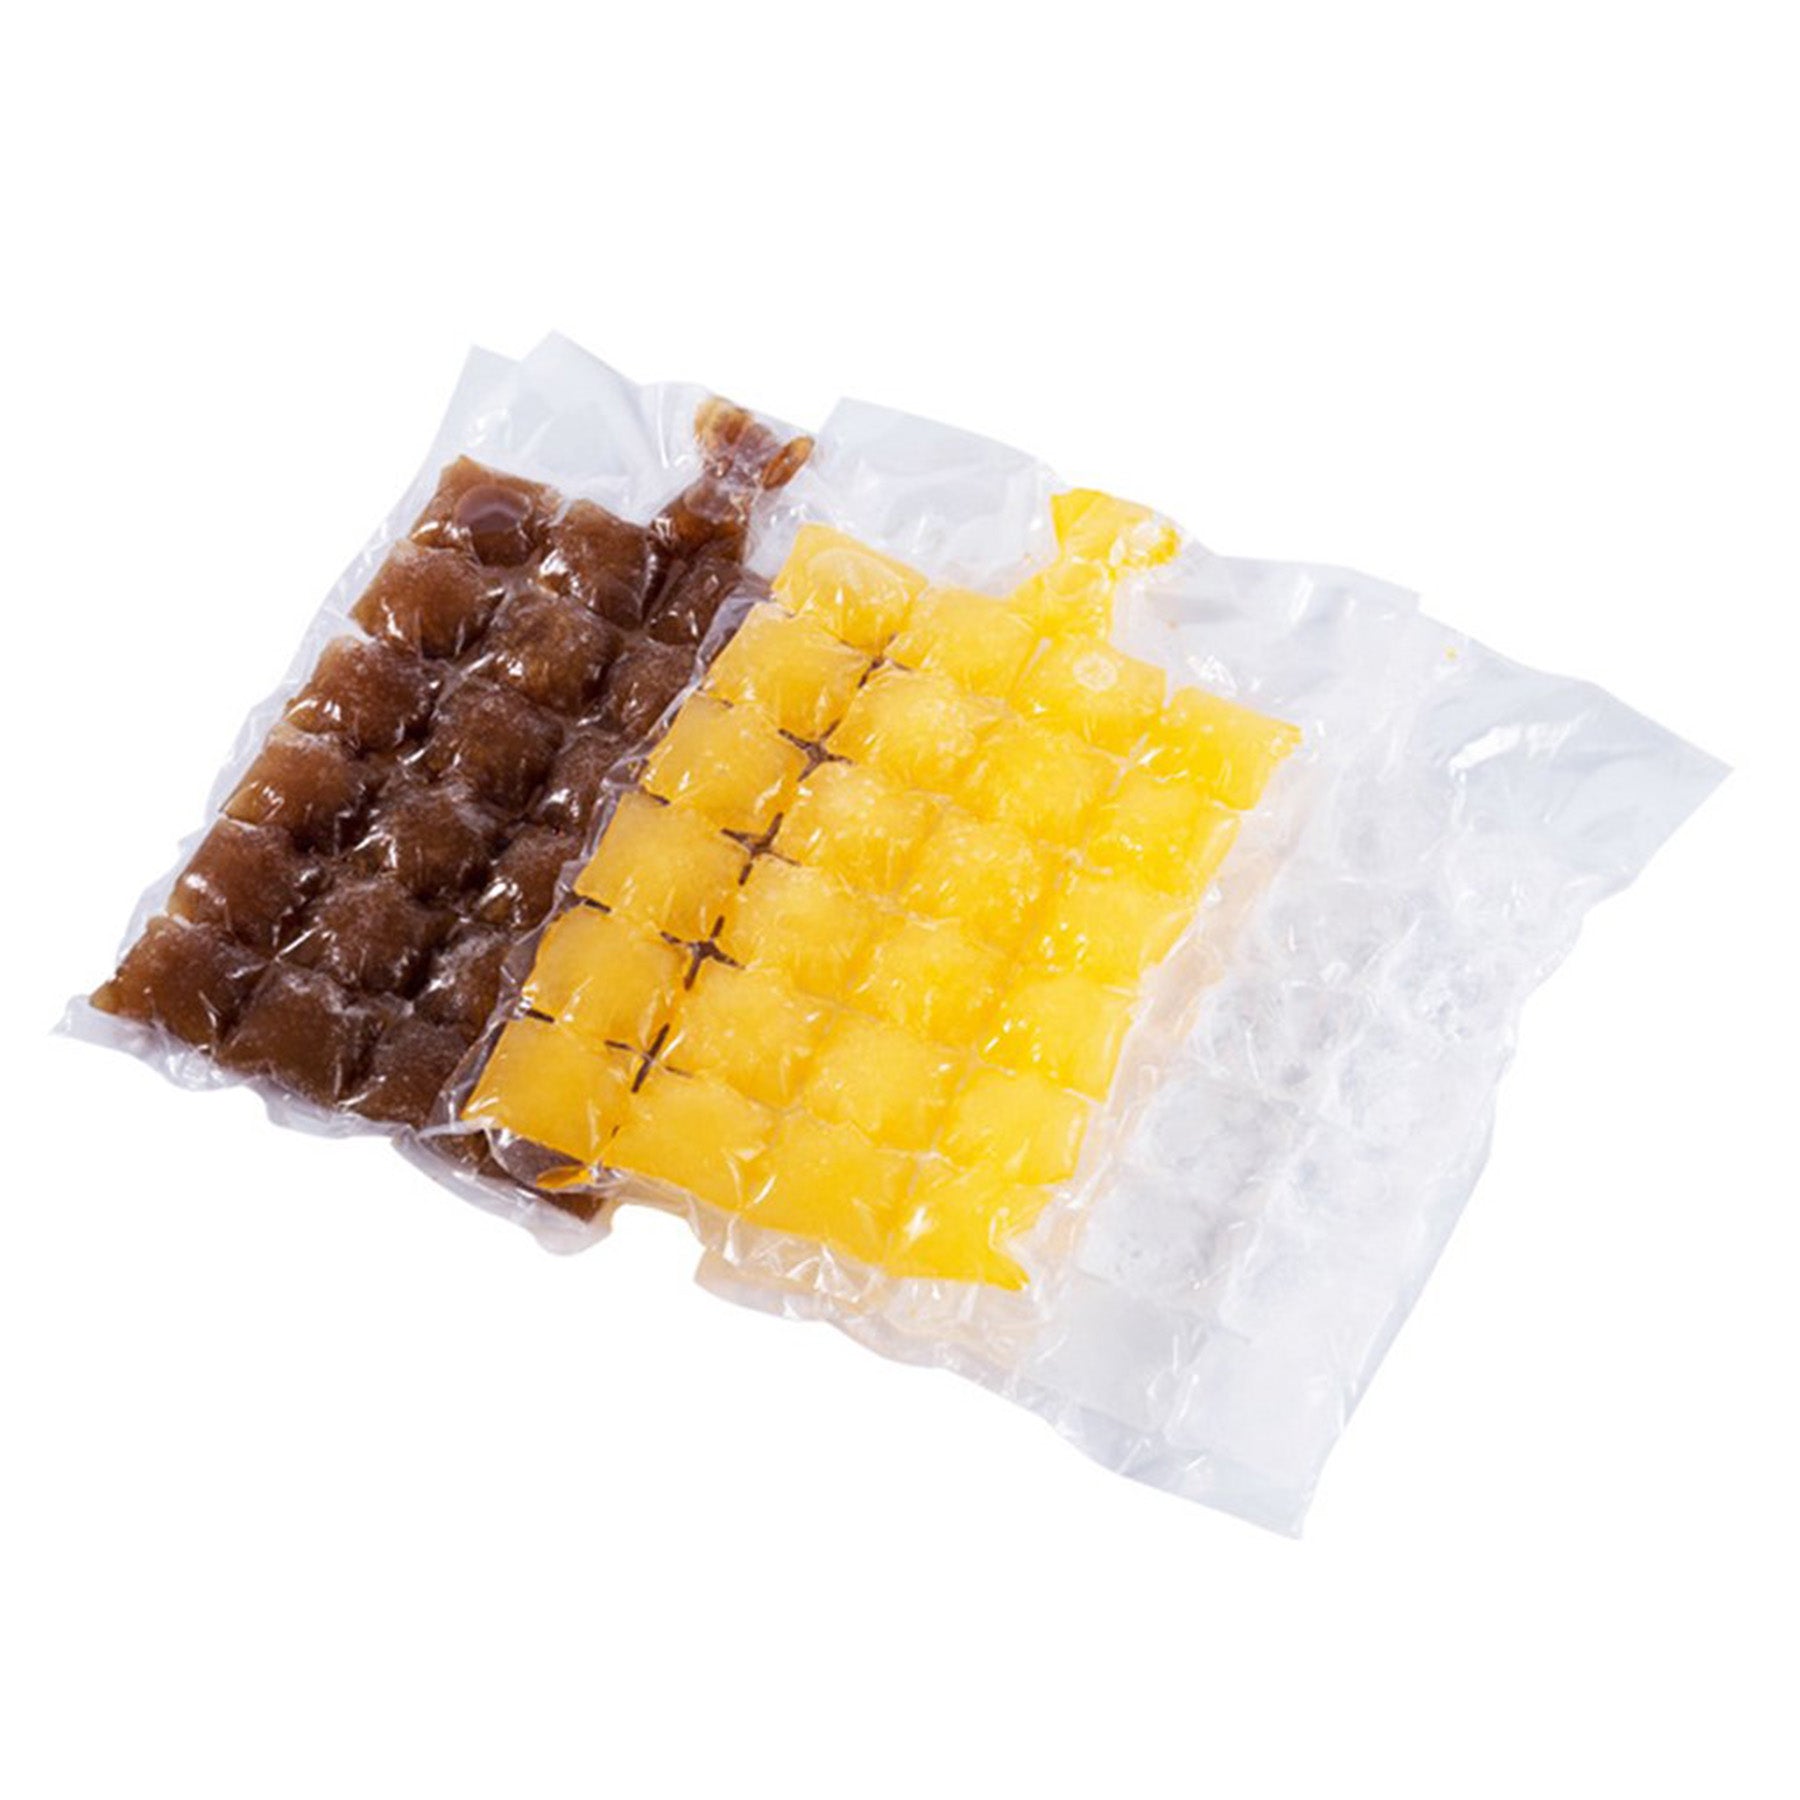 Easy Release Ice Bags Quantity: 12 ice bags